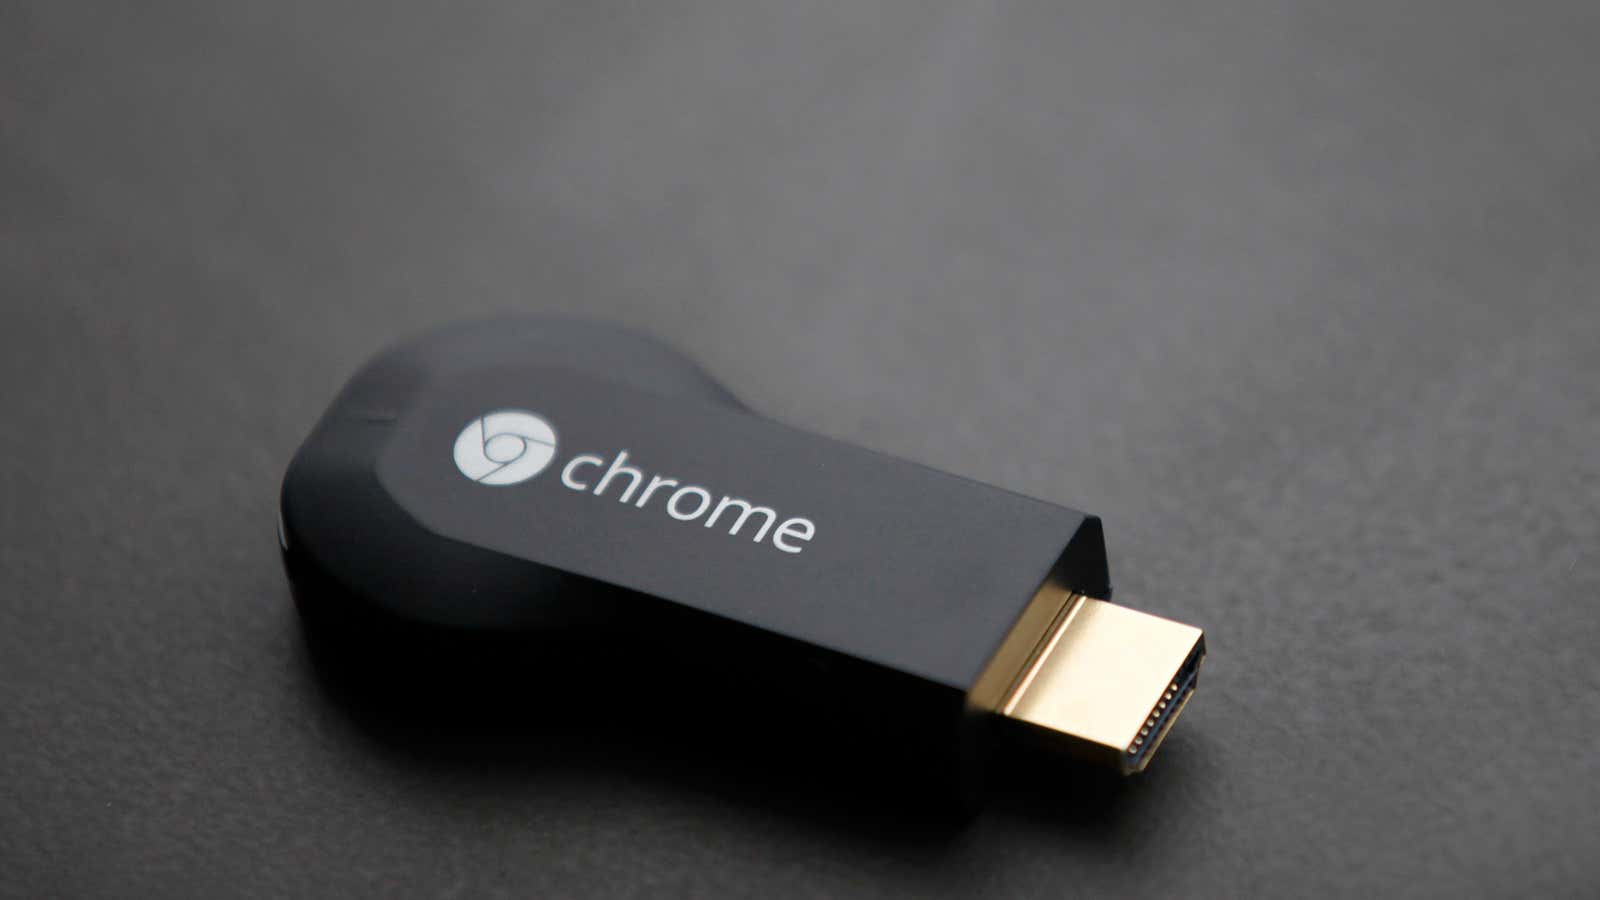 Apple TV is losing ground to new entrant Chromecast.